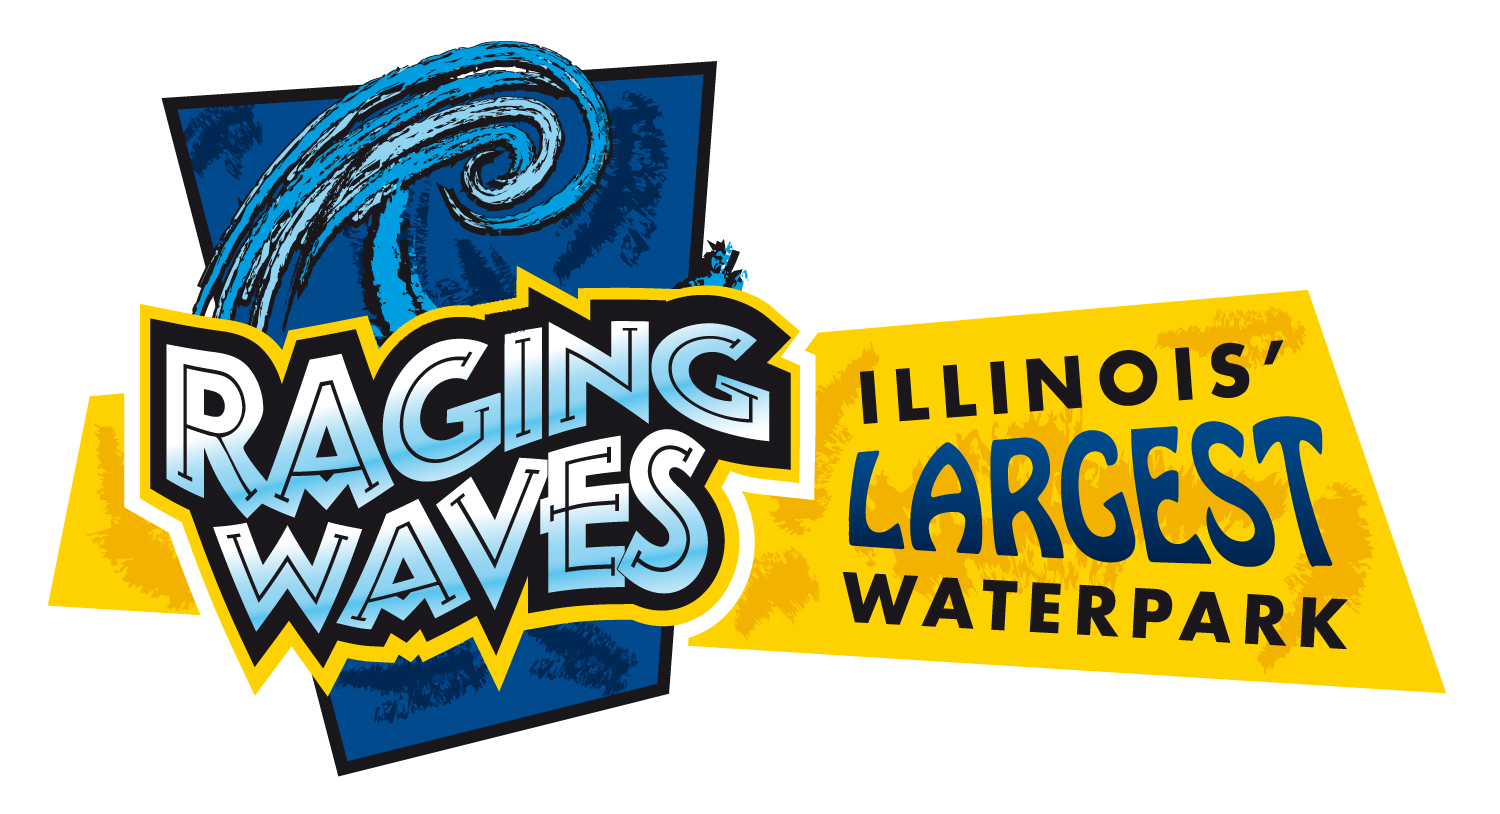 Experience Summer at Raging Waves Waterpark